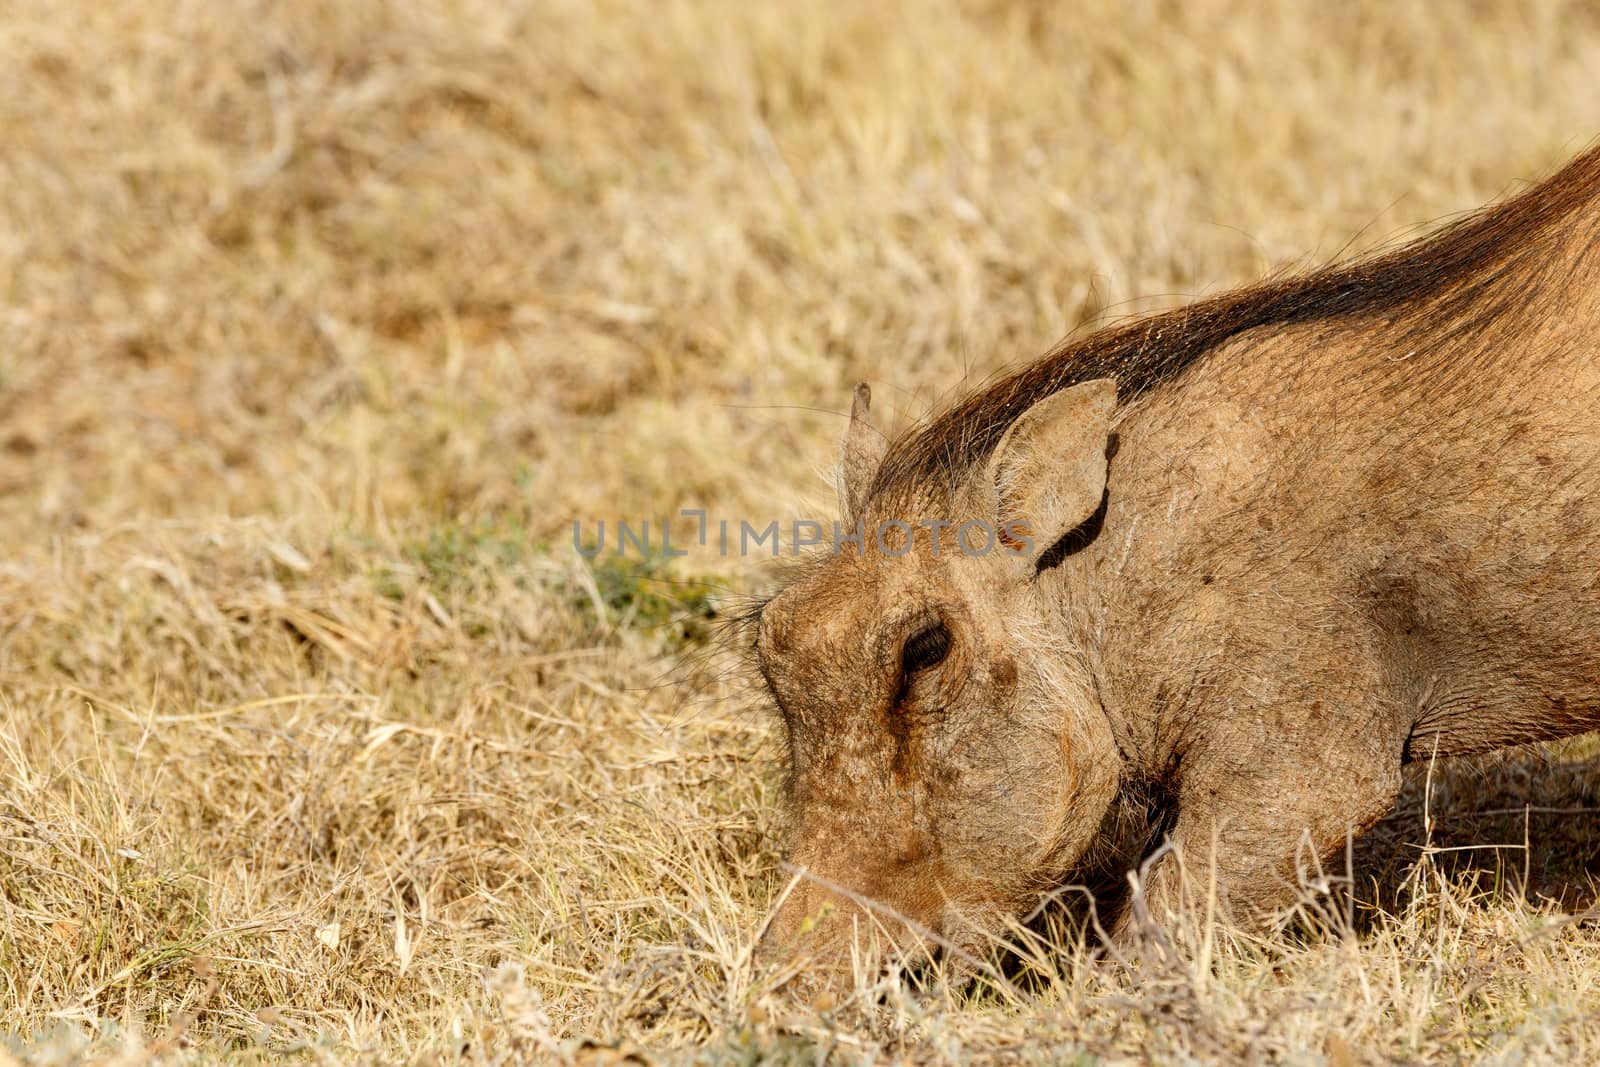 Common warthog digging in the green dry grass.